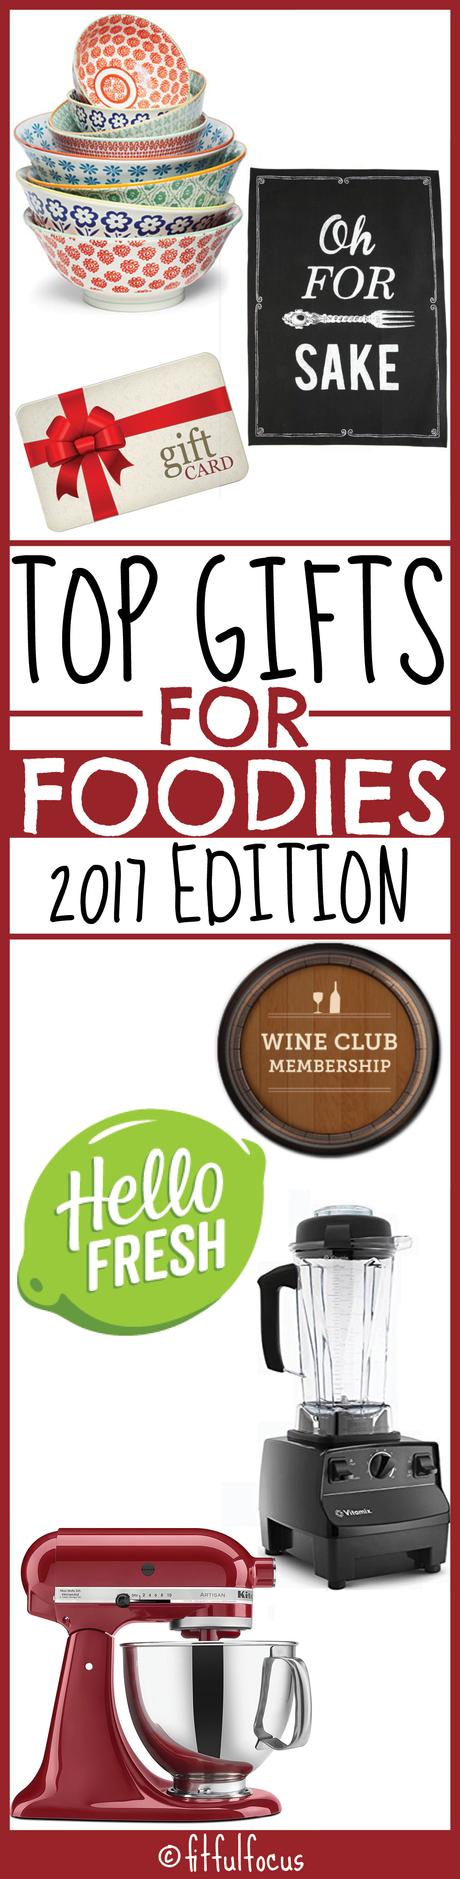 Top Gifts for Foodies, 2017 Edition